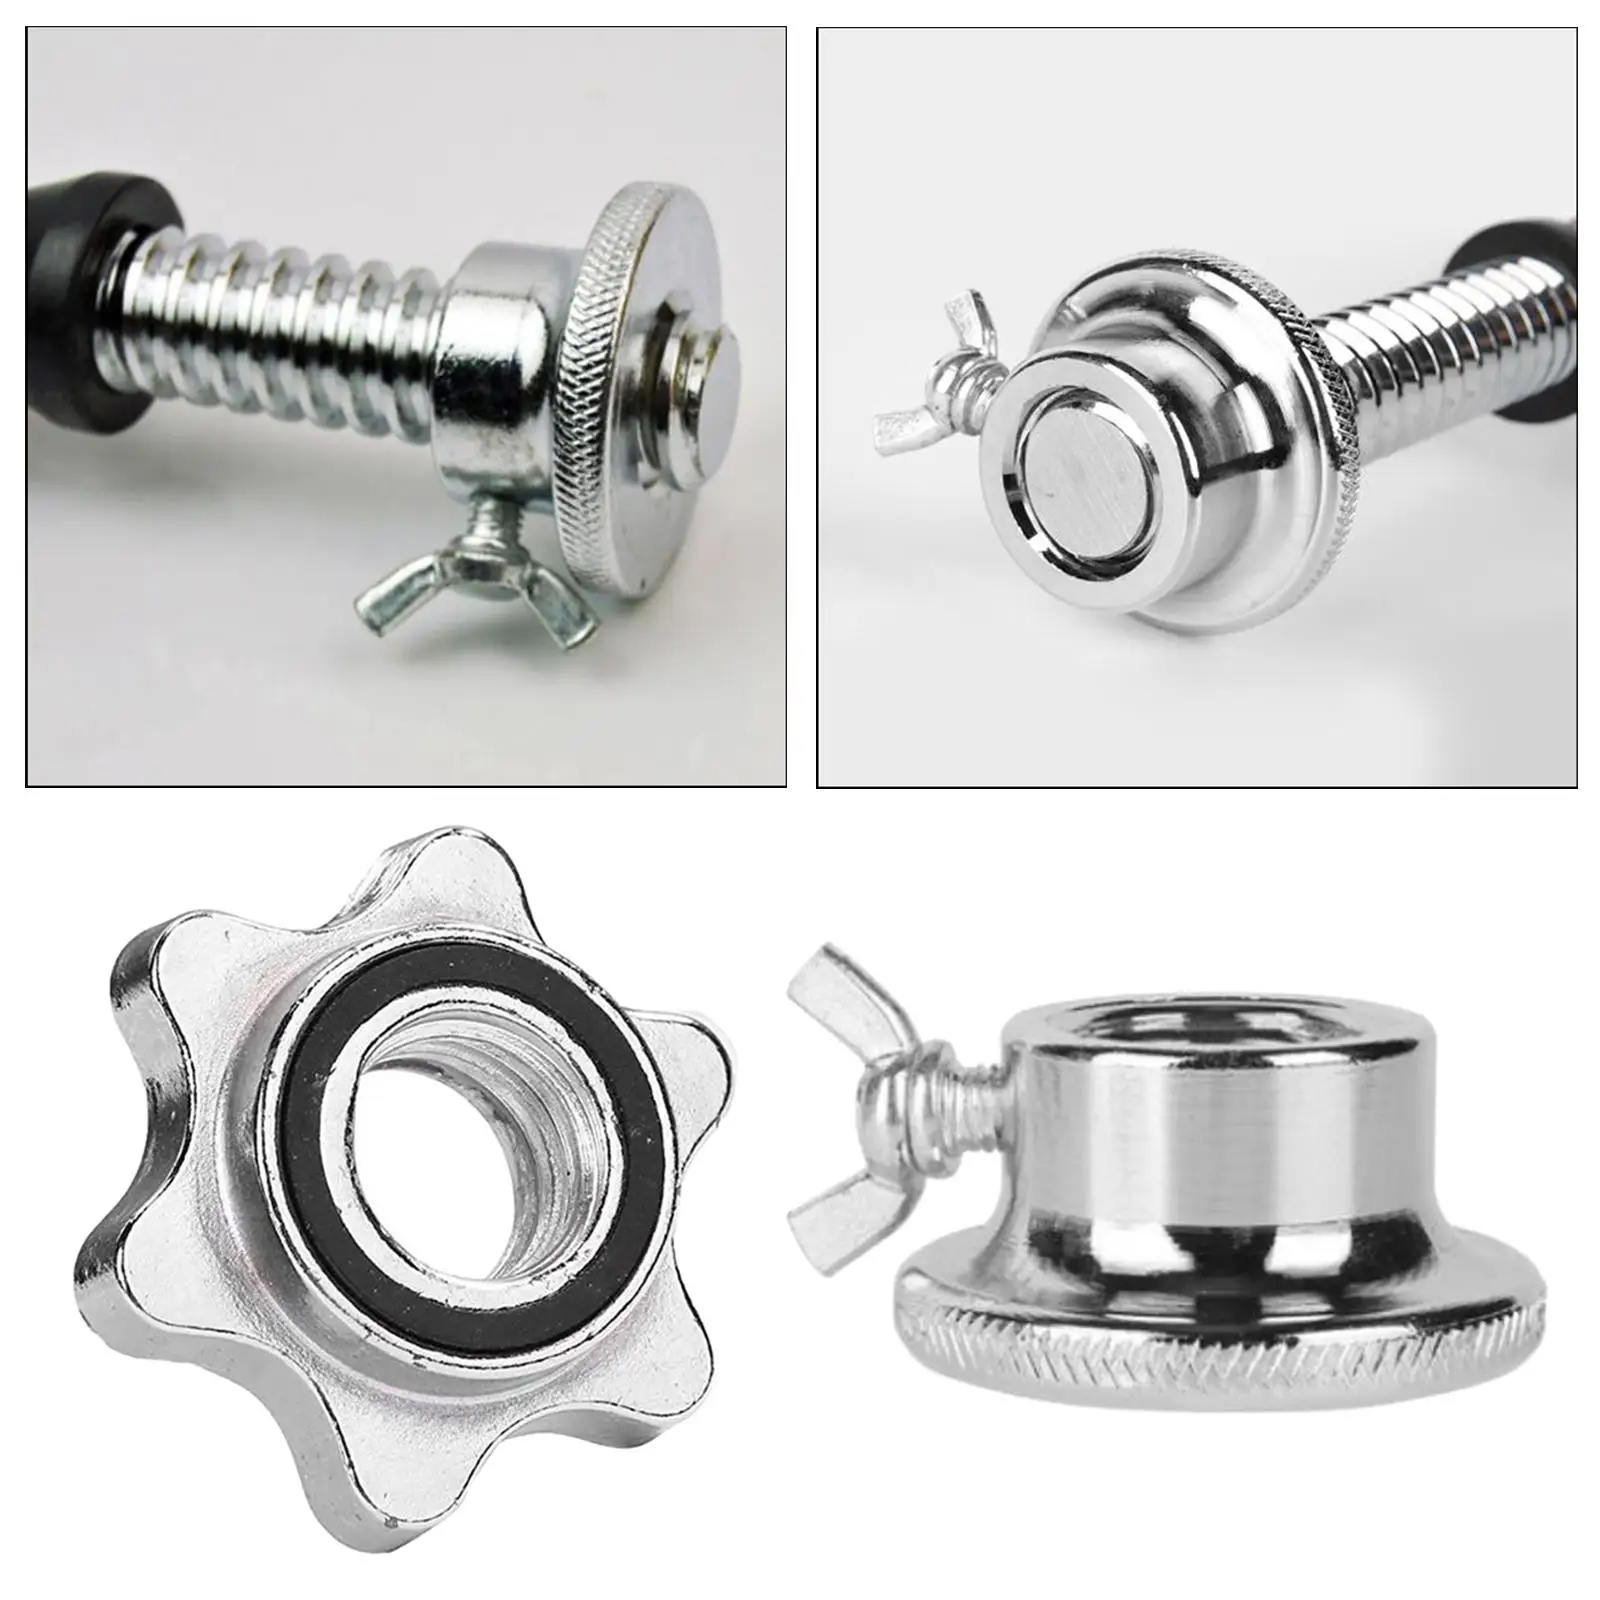 Stainless Steel Hex Nuts,-Lock Collar Screw for Barbell Dumbell Weight Lifting 2.5cm (Silver)